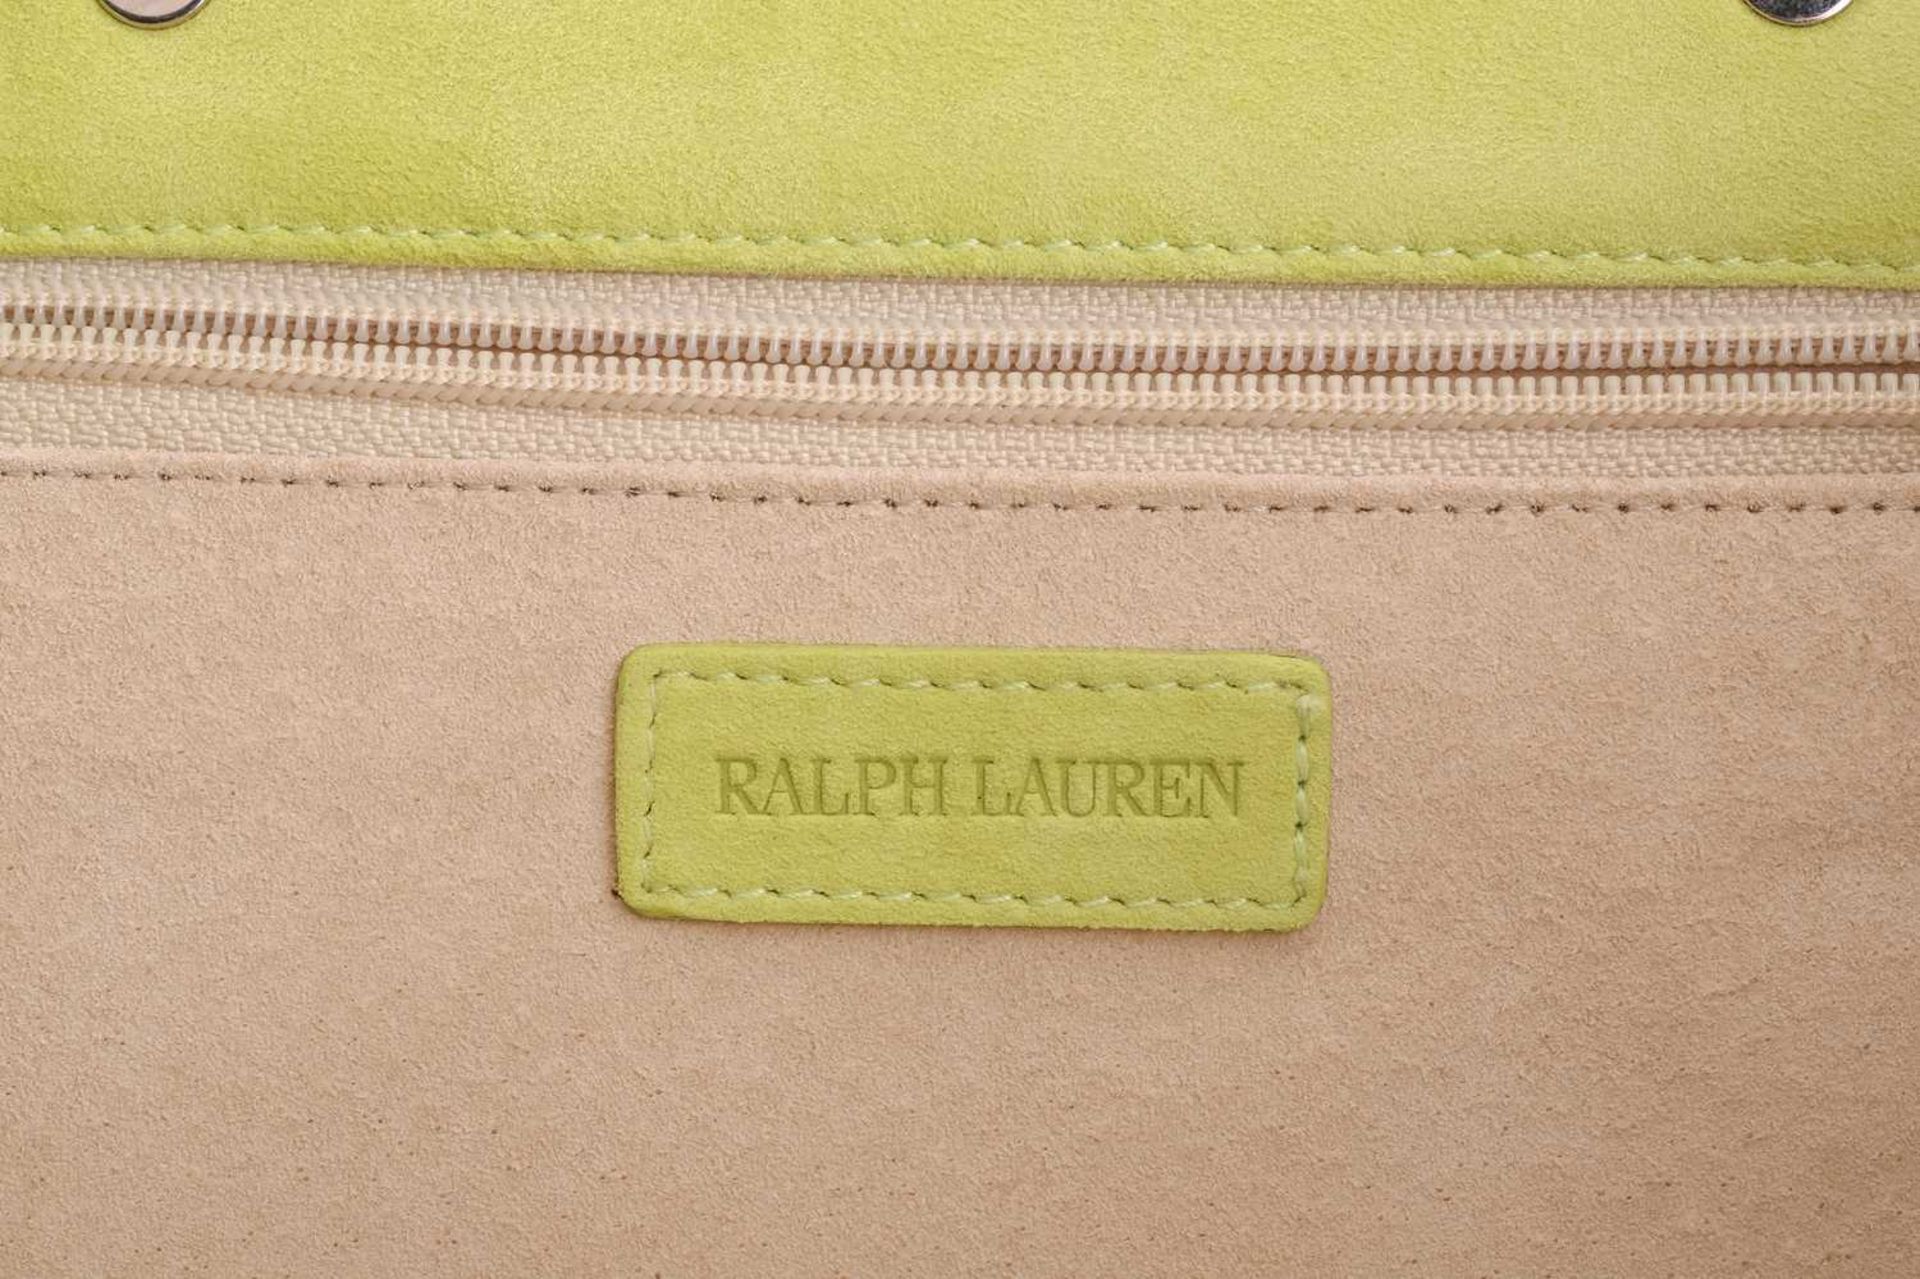 A Ralph Lauren lime green suede tote bag, rectangular body with silver-tone metal top handles. - Image 7 of 8